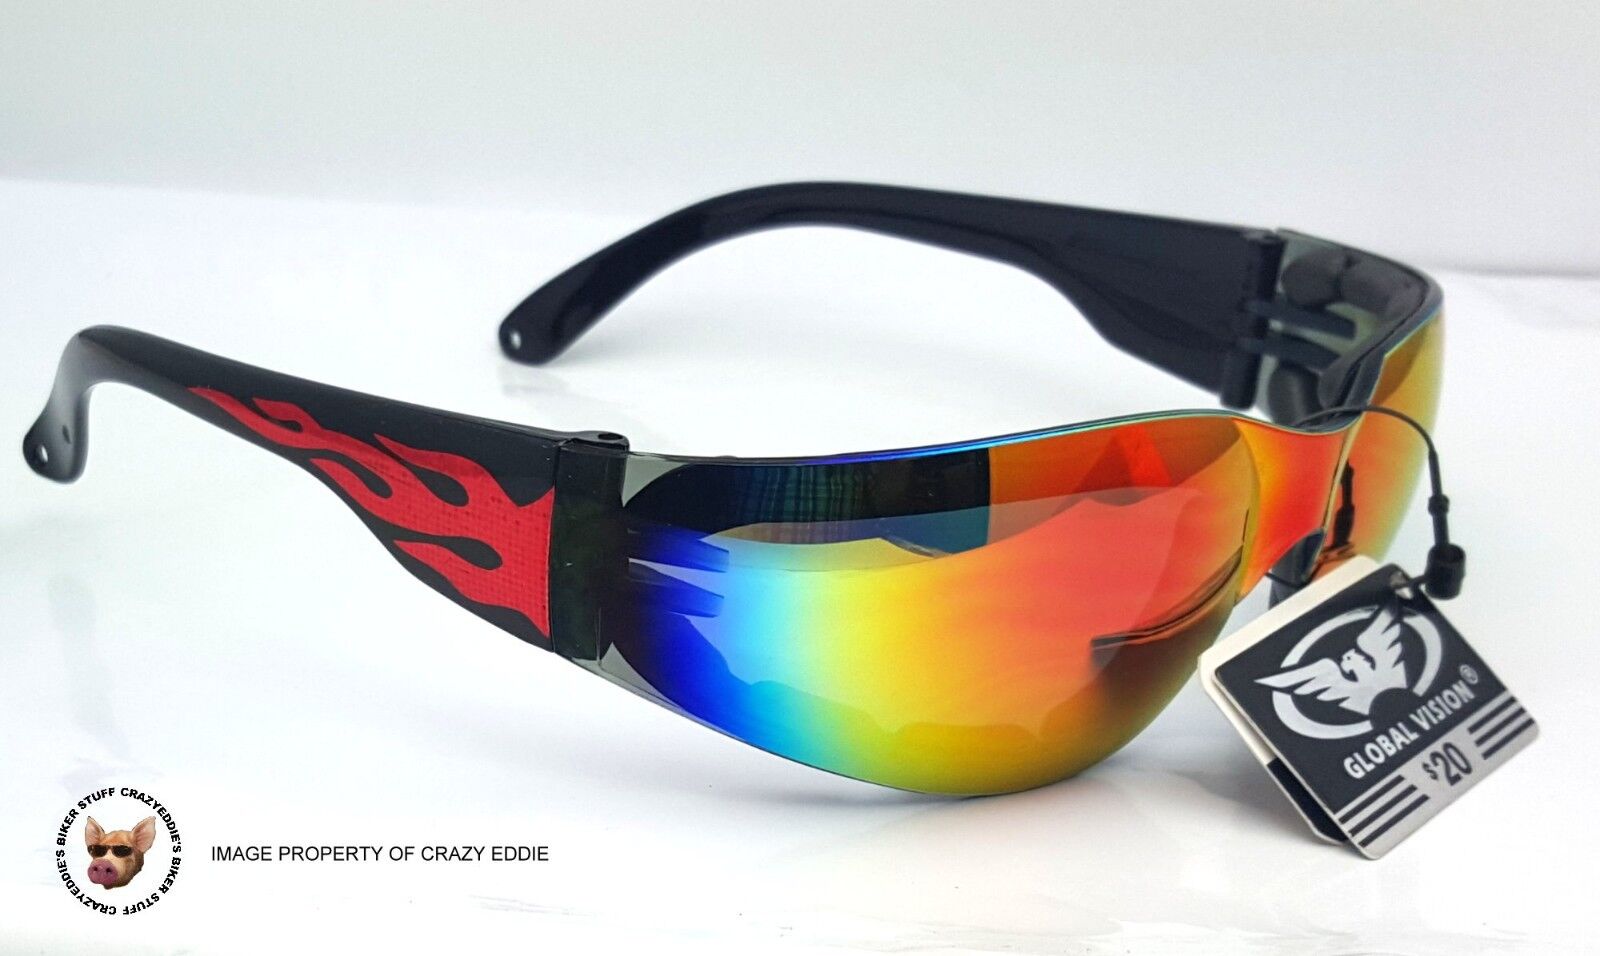 GLOBAL VISION® RIDER PADDED GLASSES WITH FLAMES AND G-TECH LENS BIKER GLASSES 